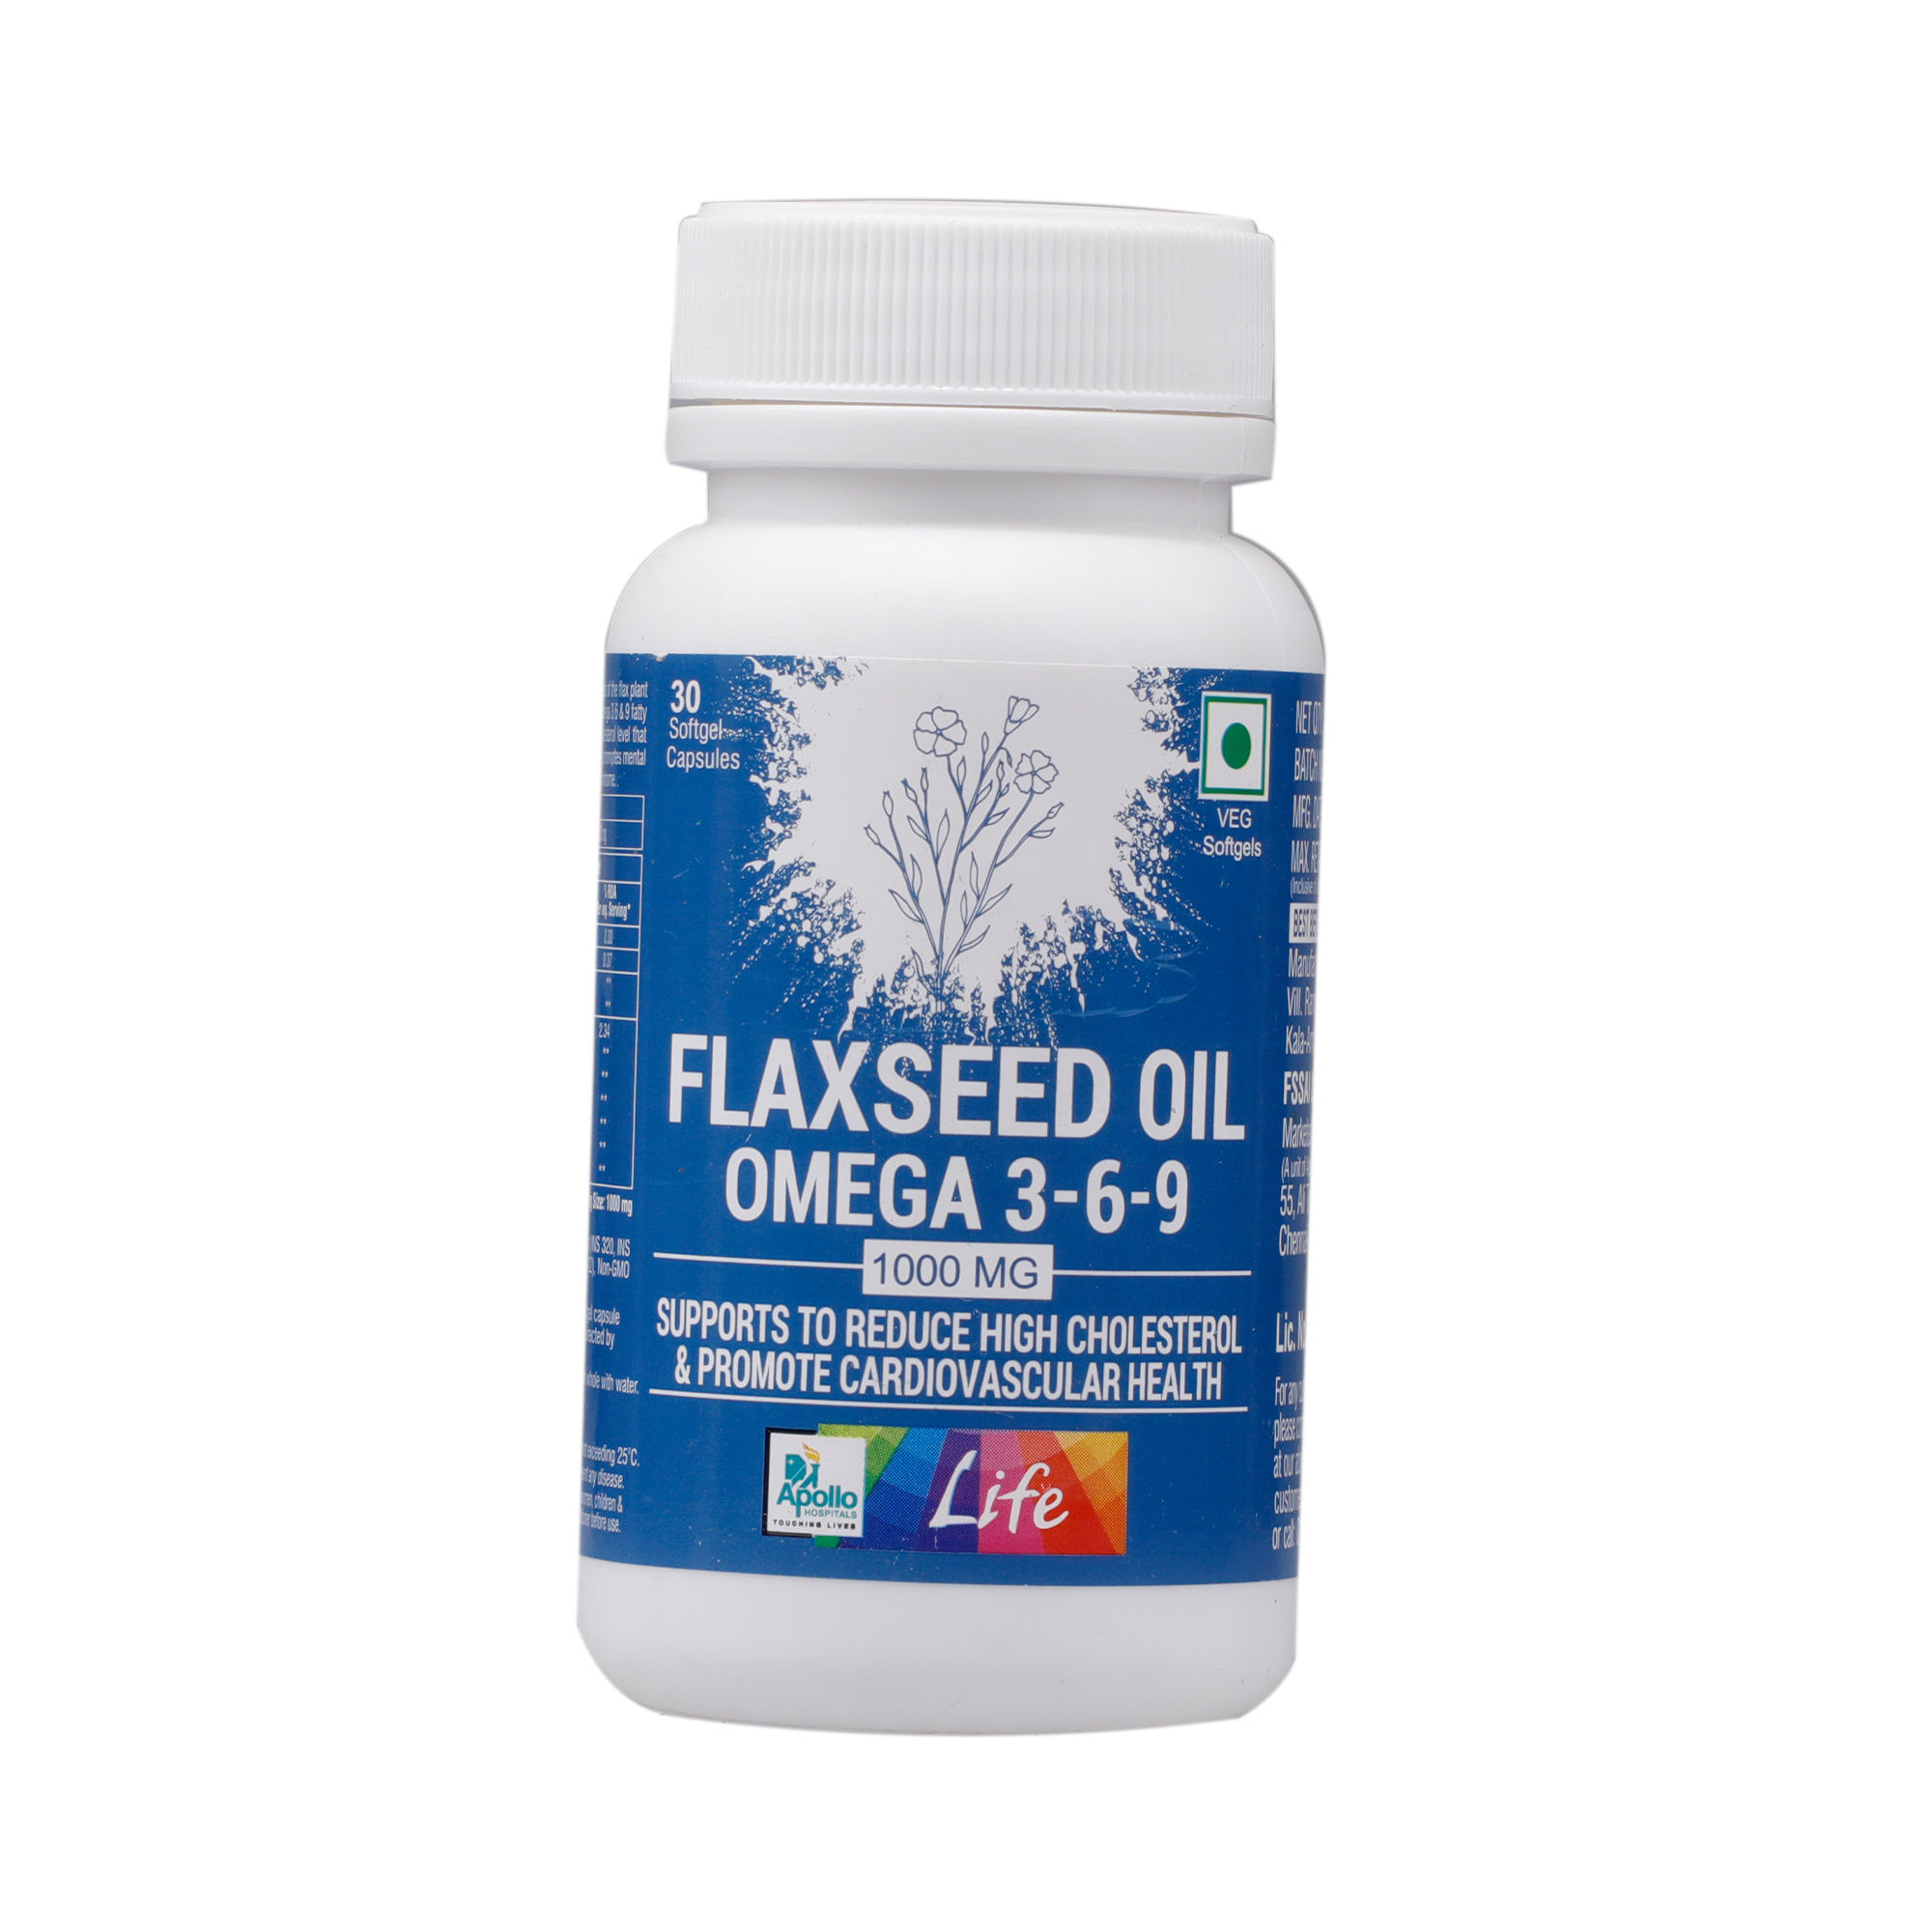 Buy Apollo Life Flaxseed Oil Omega 3-6-9 1000 mg, 30 Capsules Online